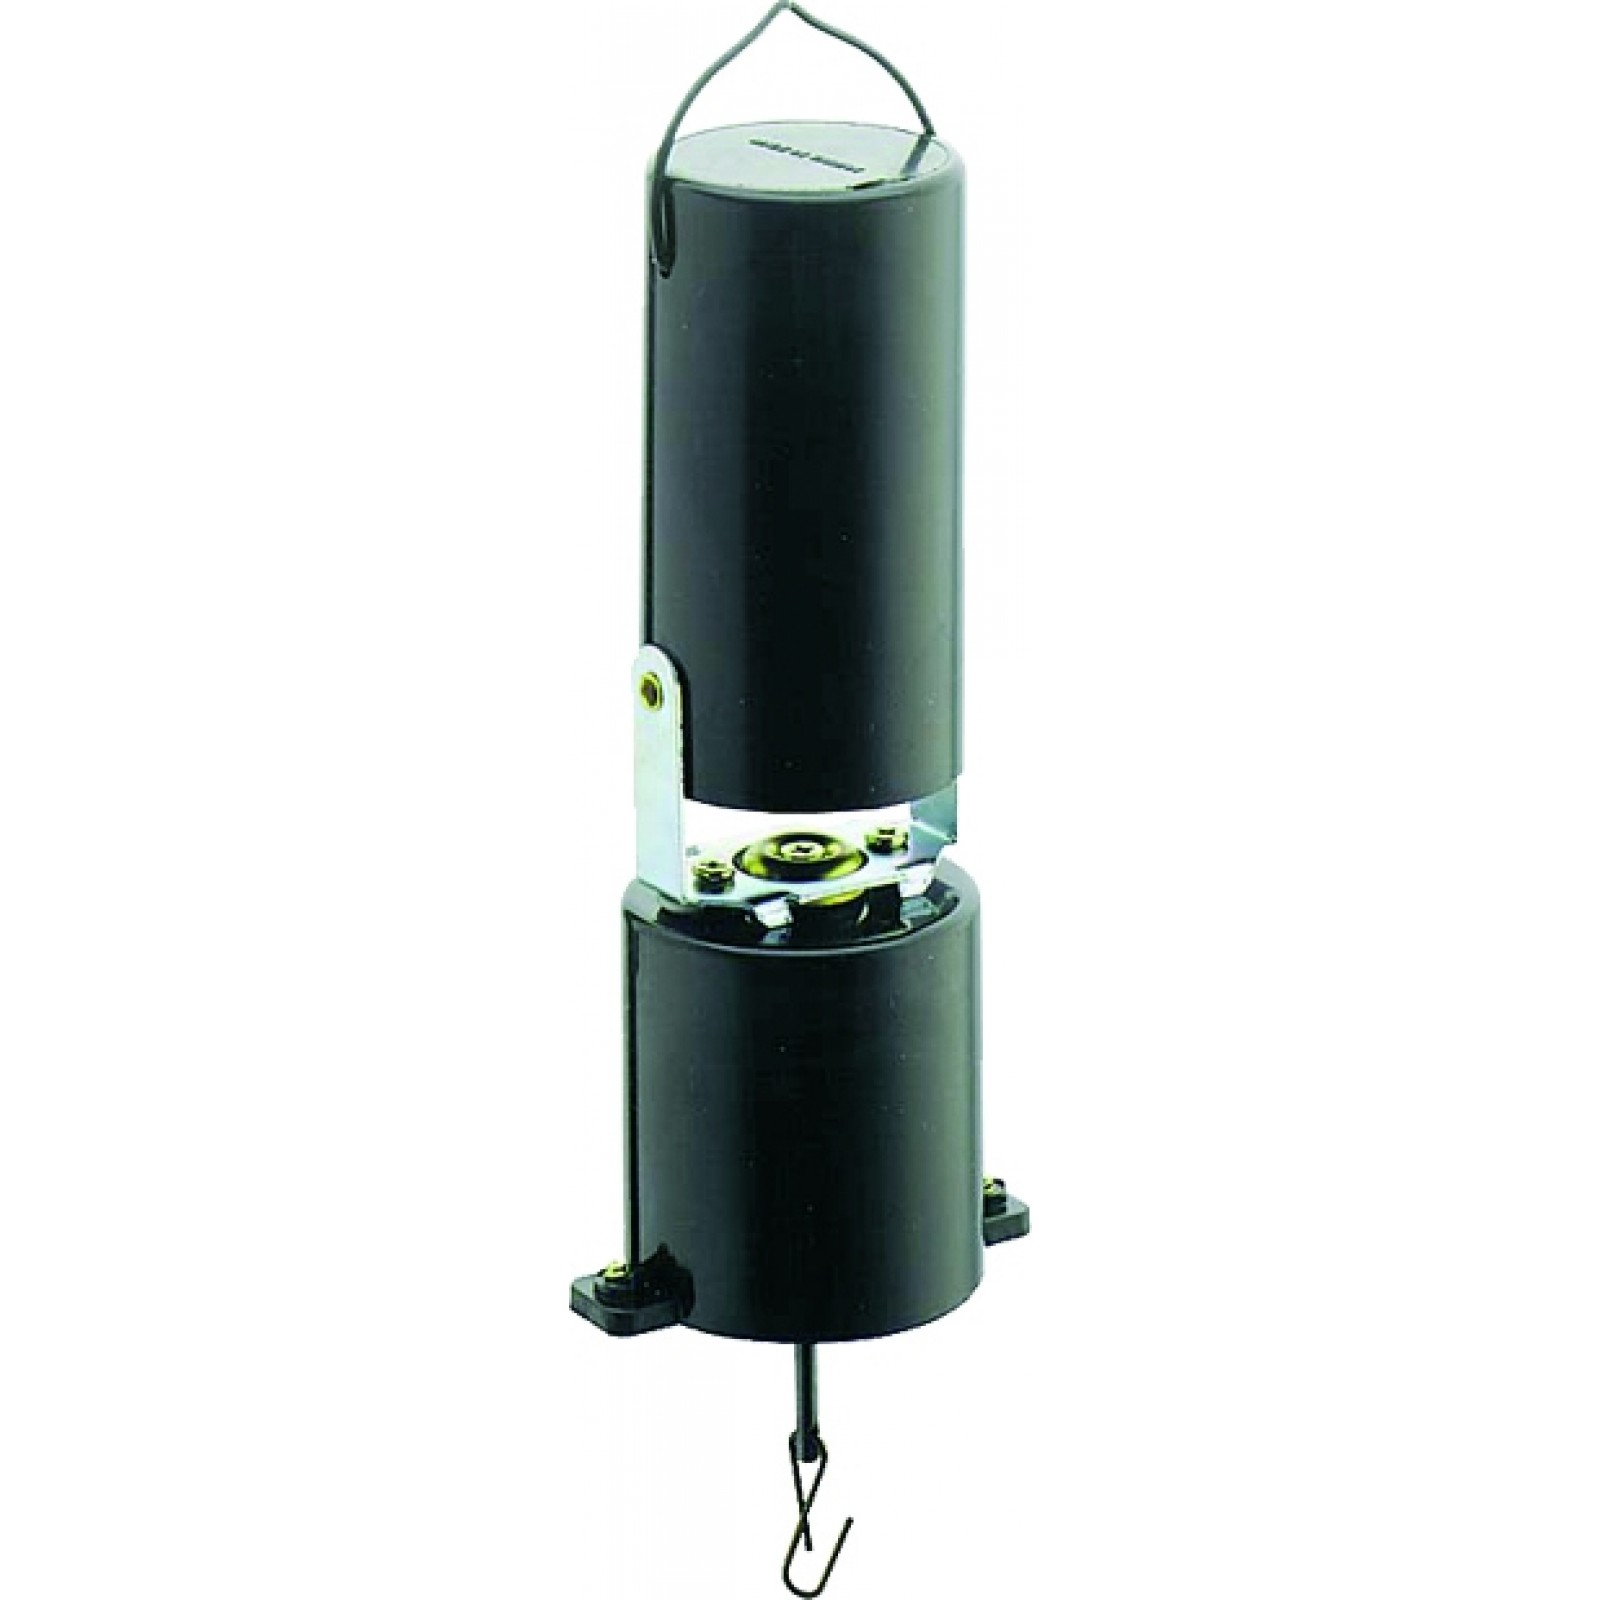 MB MU-1,Motor battery pour mirrorball 20cm max.